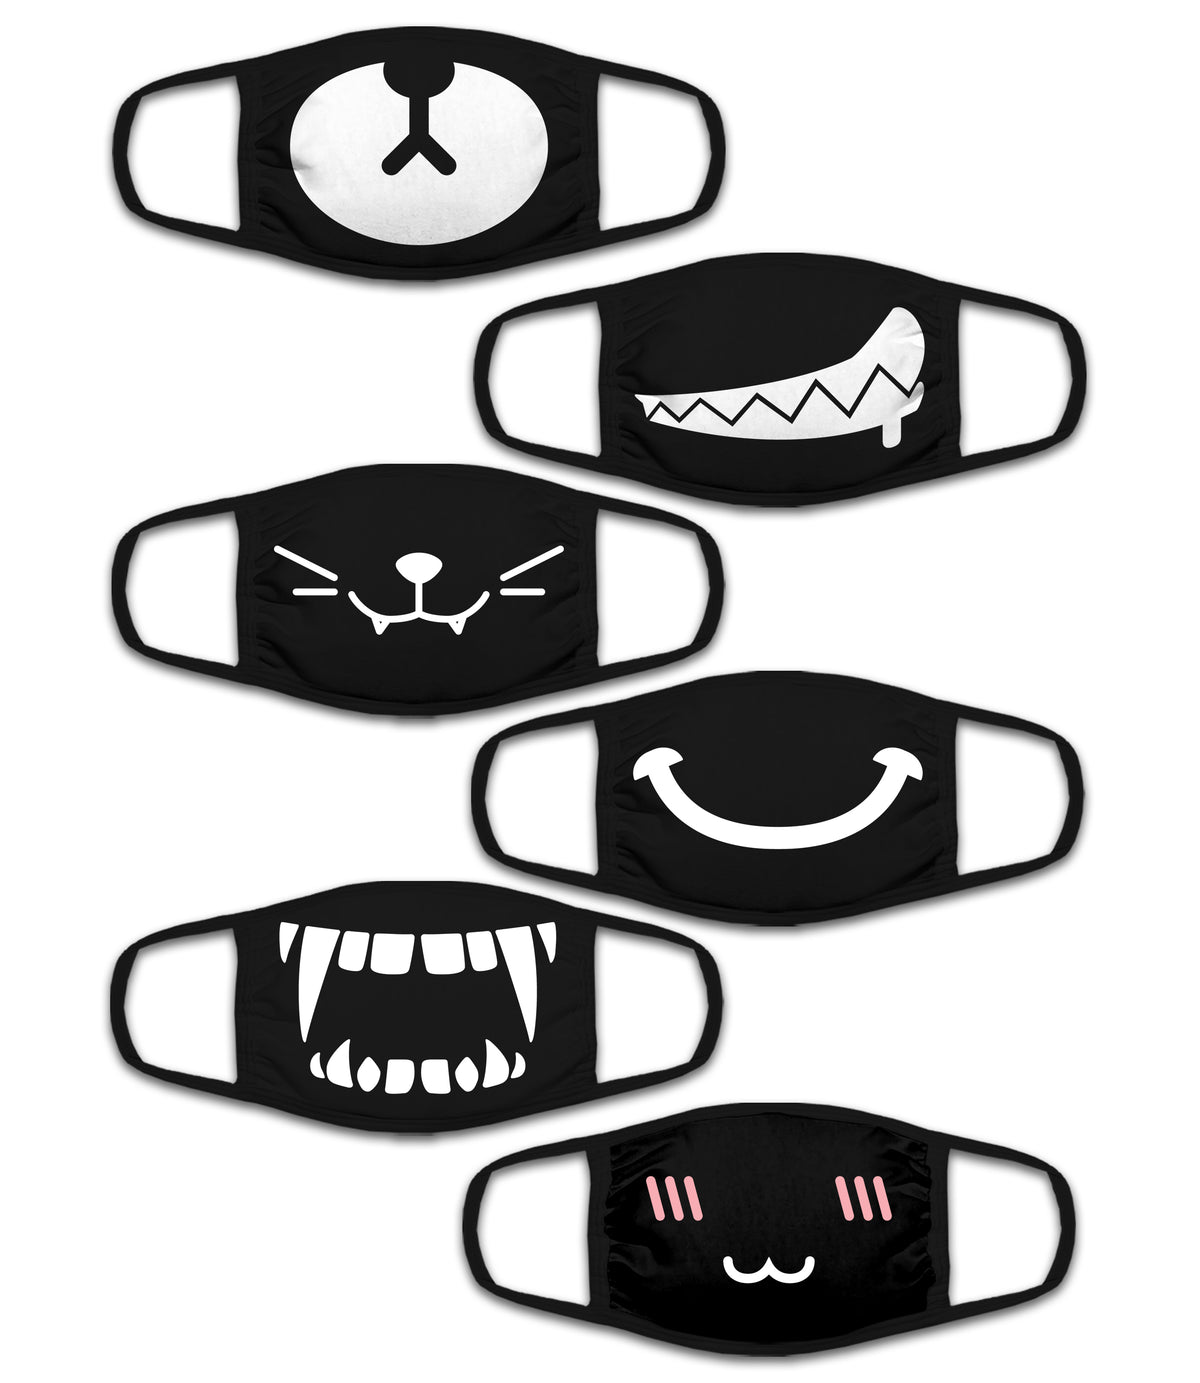 Face Mouth Mask - Cotton Face Covering Neck Mask for Men and Women - 6 Pack Black Anime